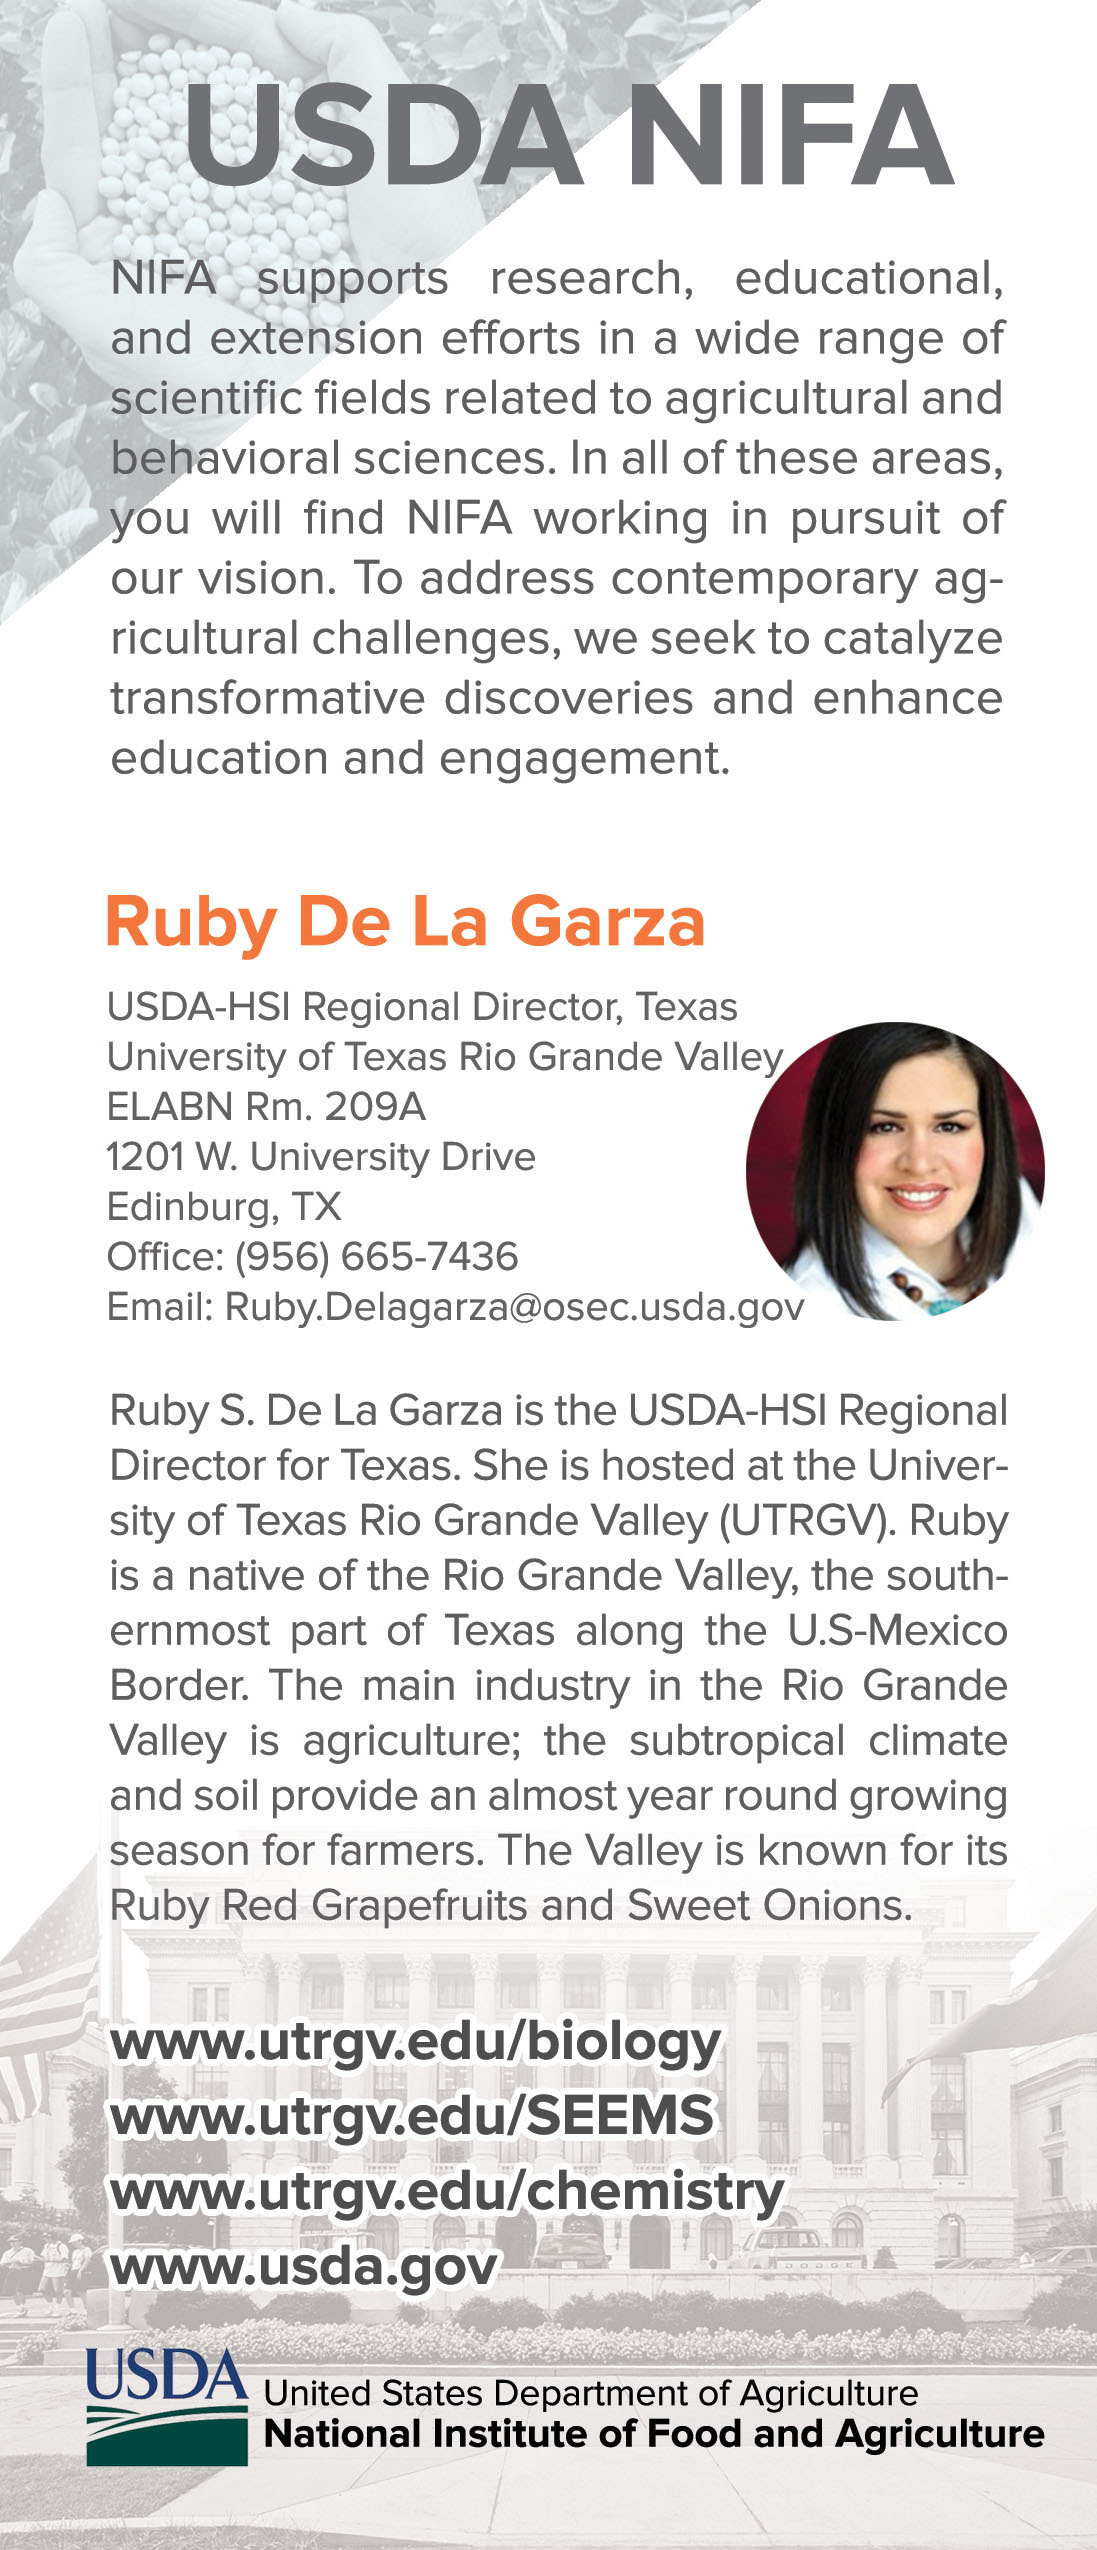 USDA NIFA supports research, educational, and extension efforts in a wide range of scientific fields related to agricultural and behavioral sciences. In all of these areas you will find NIFA working in pursuit of our vision. To address contemporary agricultural challenges, we seek to catalyze transformative discoveries and enhance education and engagement.| Ruby S. De La Garze is the USDA HSI Regional Director for Texas. She is hosted at the University of Texas at Rio Grande Valley (UTRGV). Ruby is a natuive of the Rio Grande Valley, the southernmost part of Texas along the US-Mexico Border. The main industry in the Rio Grande Valley is agriculture; the subtropical climate and soil provide an almost year round growing season for farmers. The Valley is known for its Ruby Red Grapefruits and Sweet Onions. 